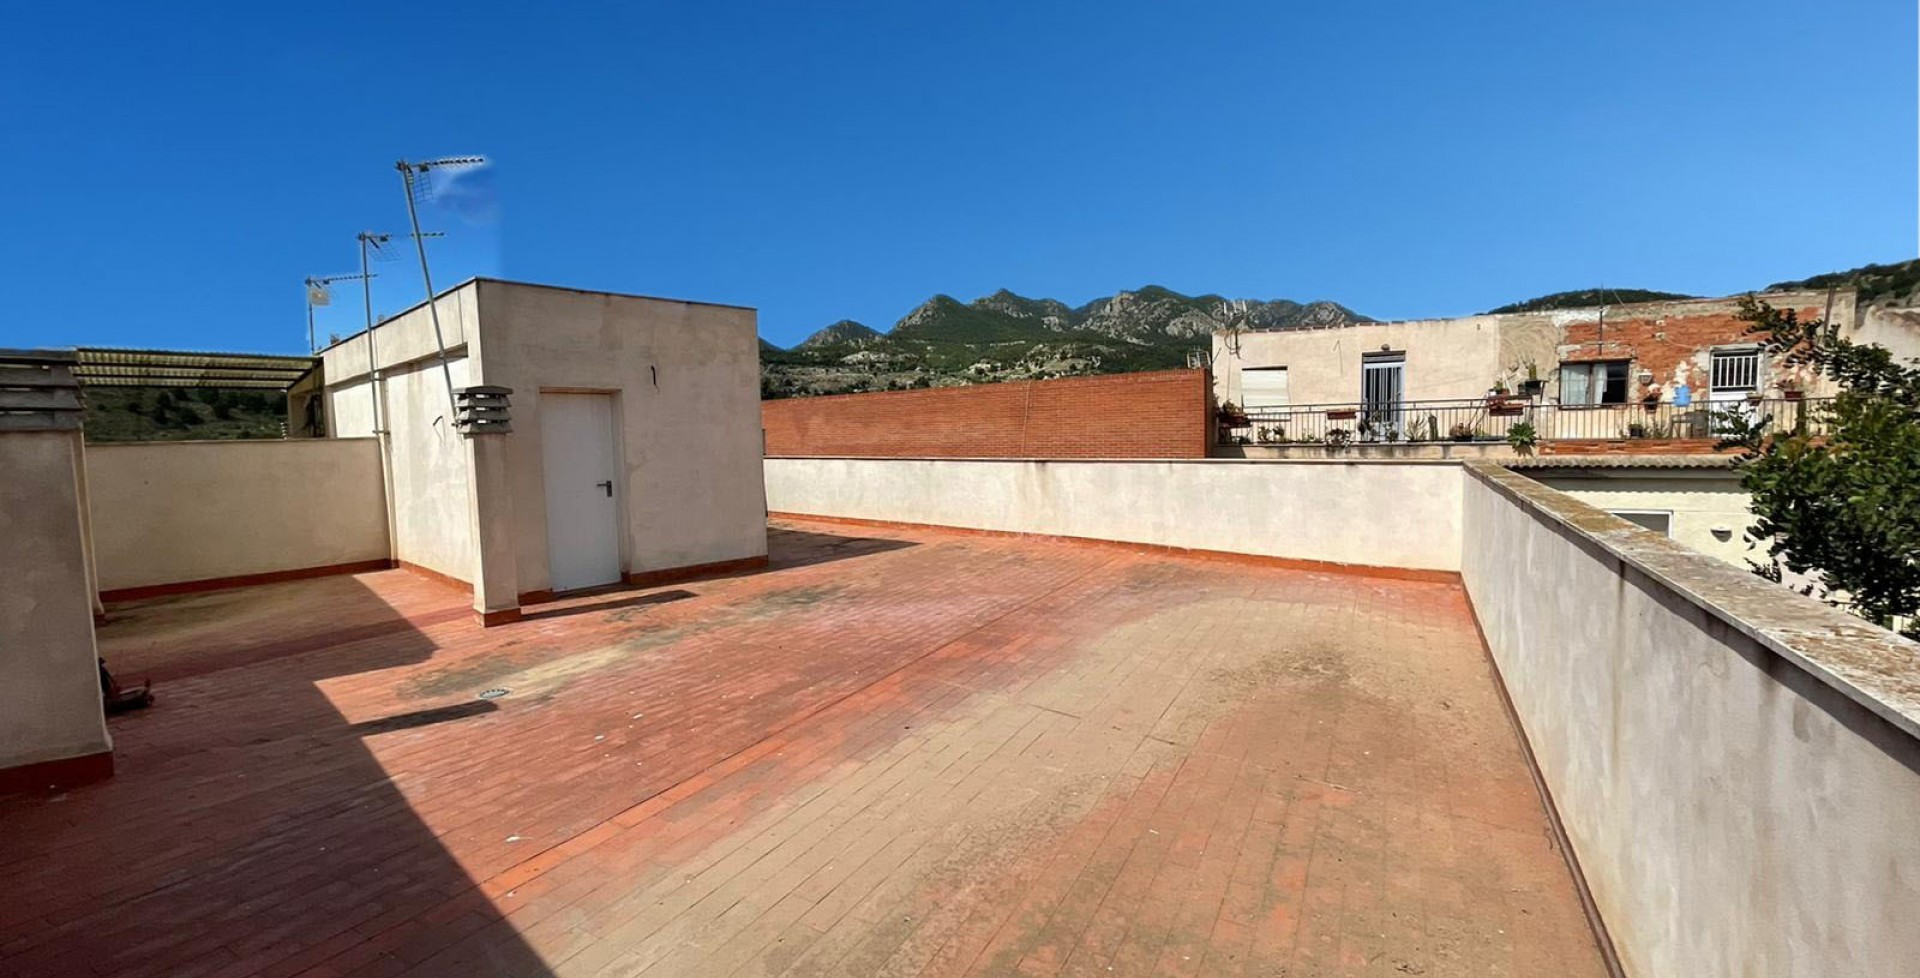 Big terrace at large town house, Ricote, Murcia, Spain